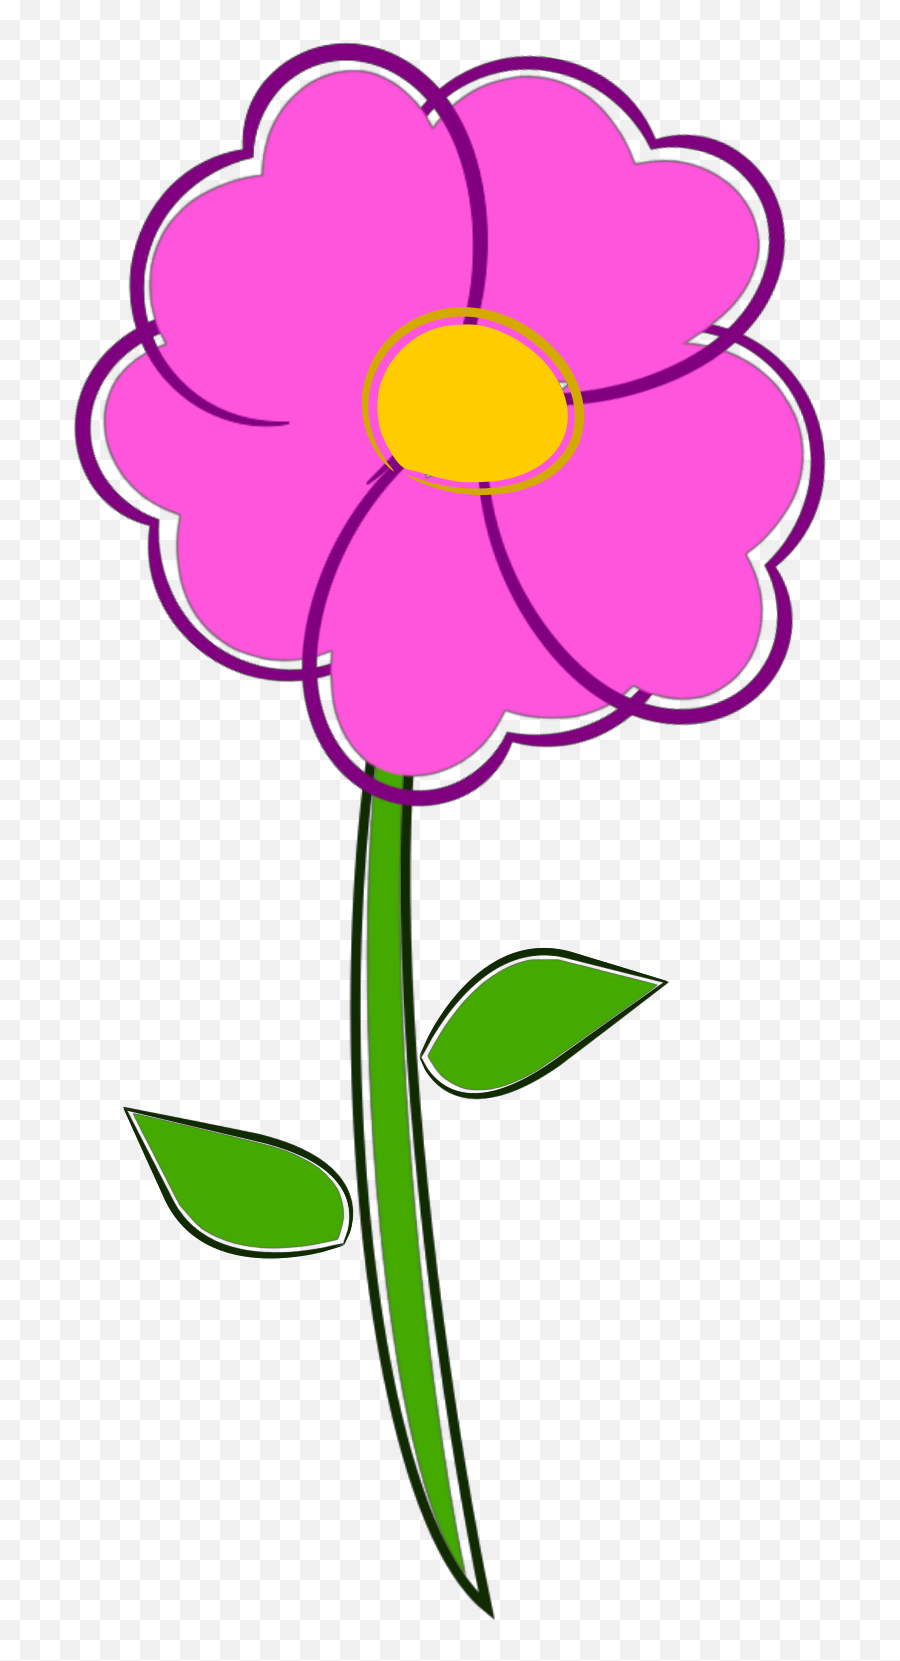 Beautiful Pink Flower Clipart Free Image - Flor Clipart Emoji,Flower Clipart